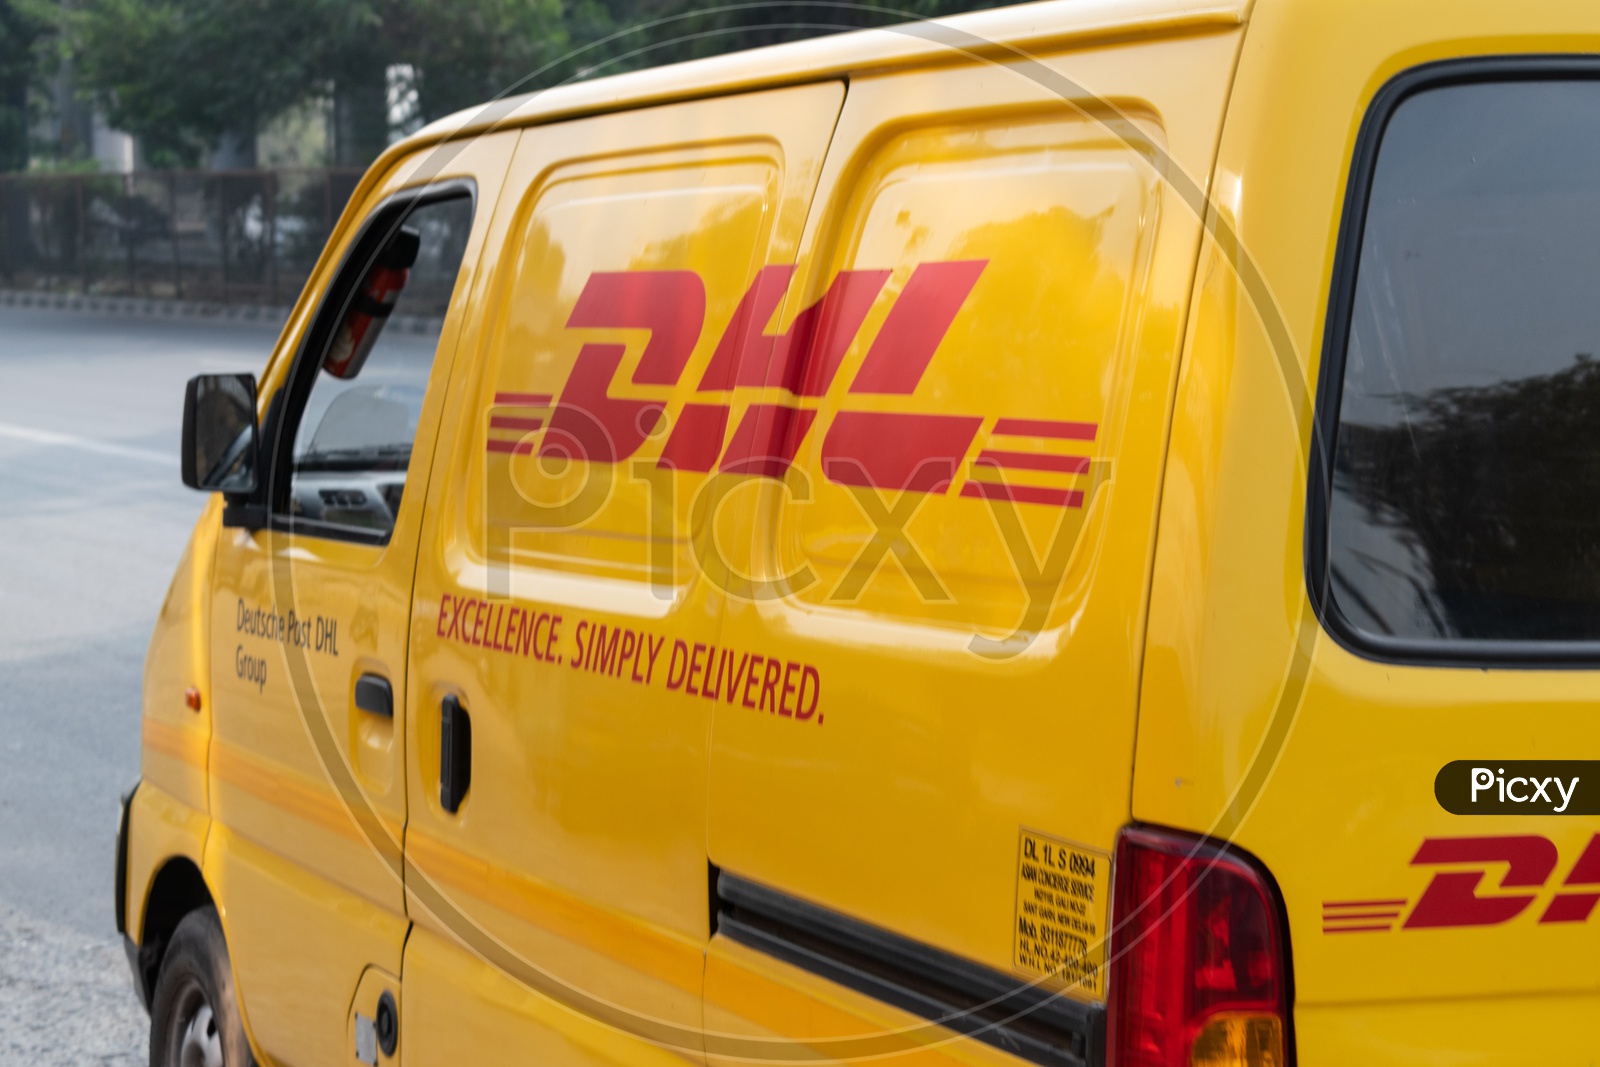 DHL (Dalsey, Hillblom and Lynn) is an international courier, parcel, and express mail service